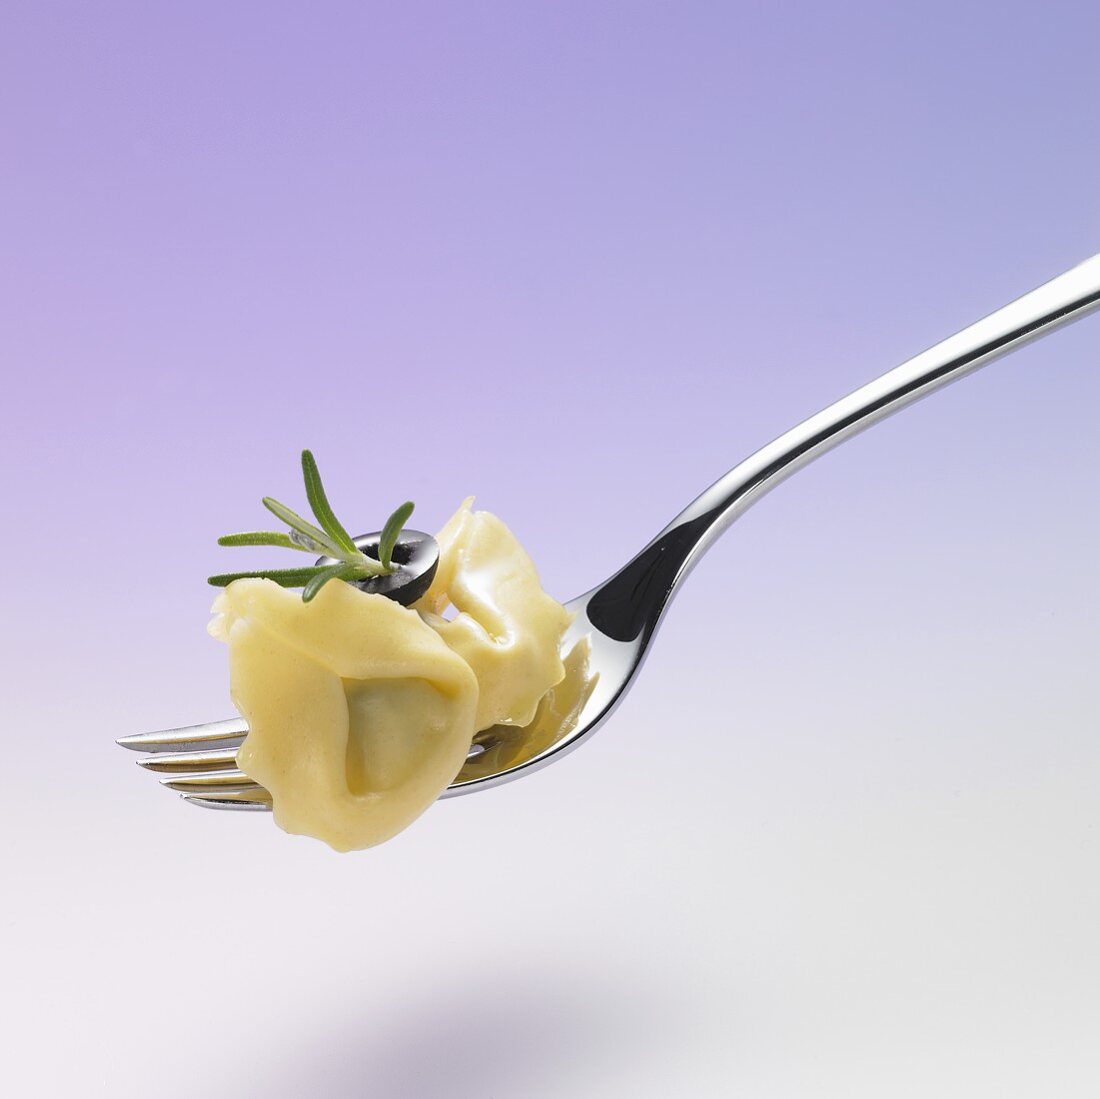 Tortellini with rosemary and olive on a plate